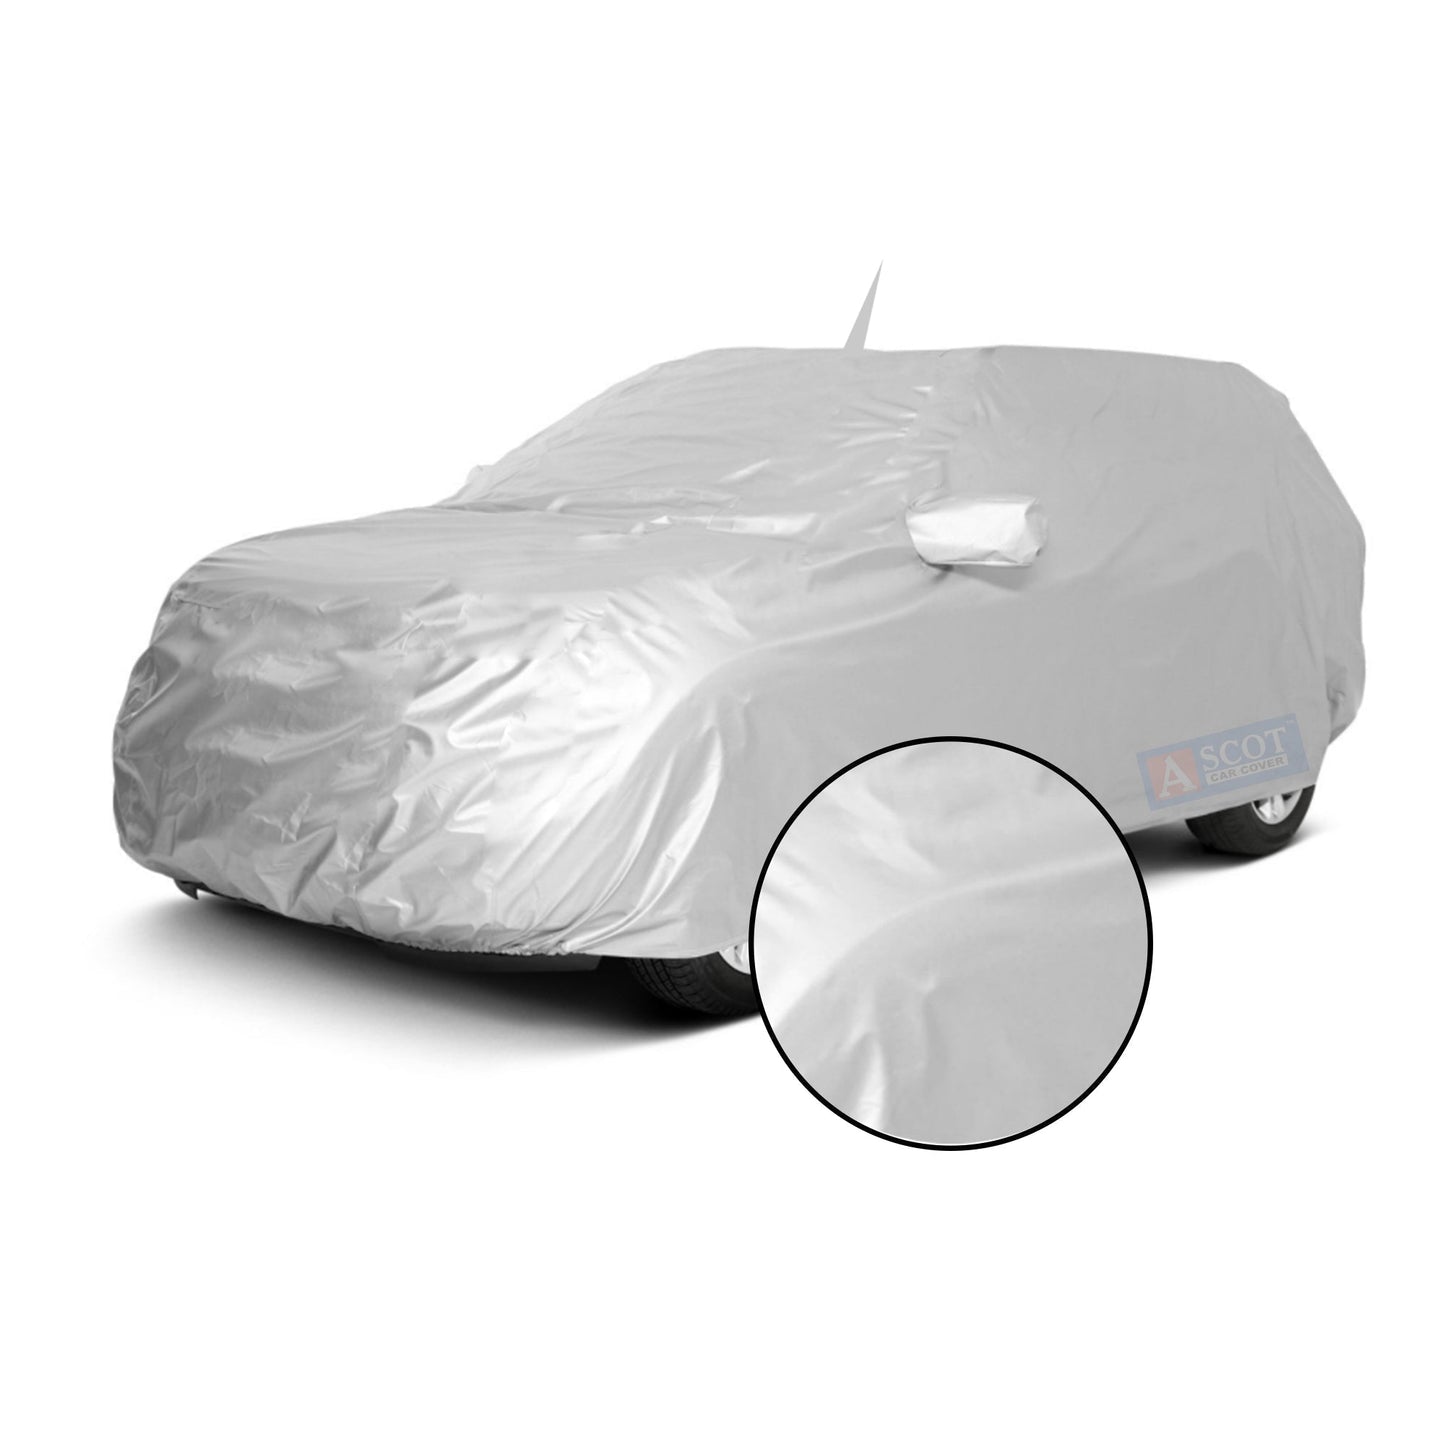 Ascot Volkswagen Ameo Car Body Cover Dust Proof, Trippel Stitched